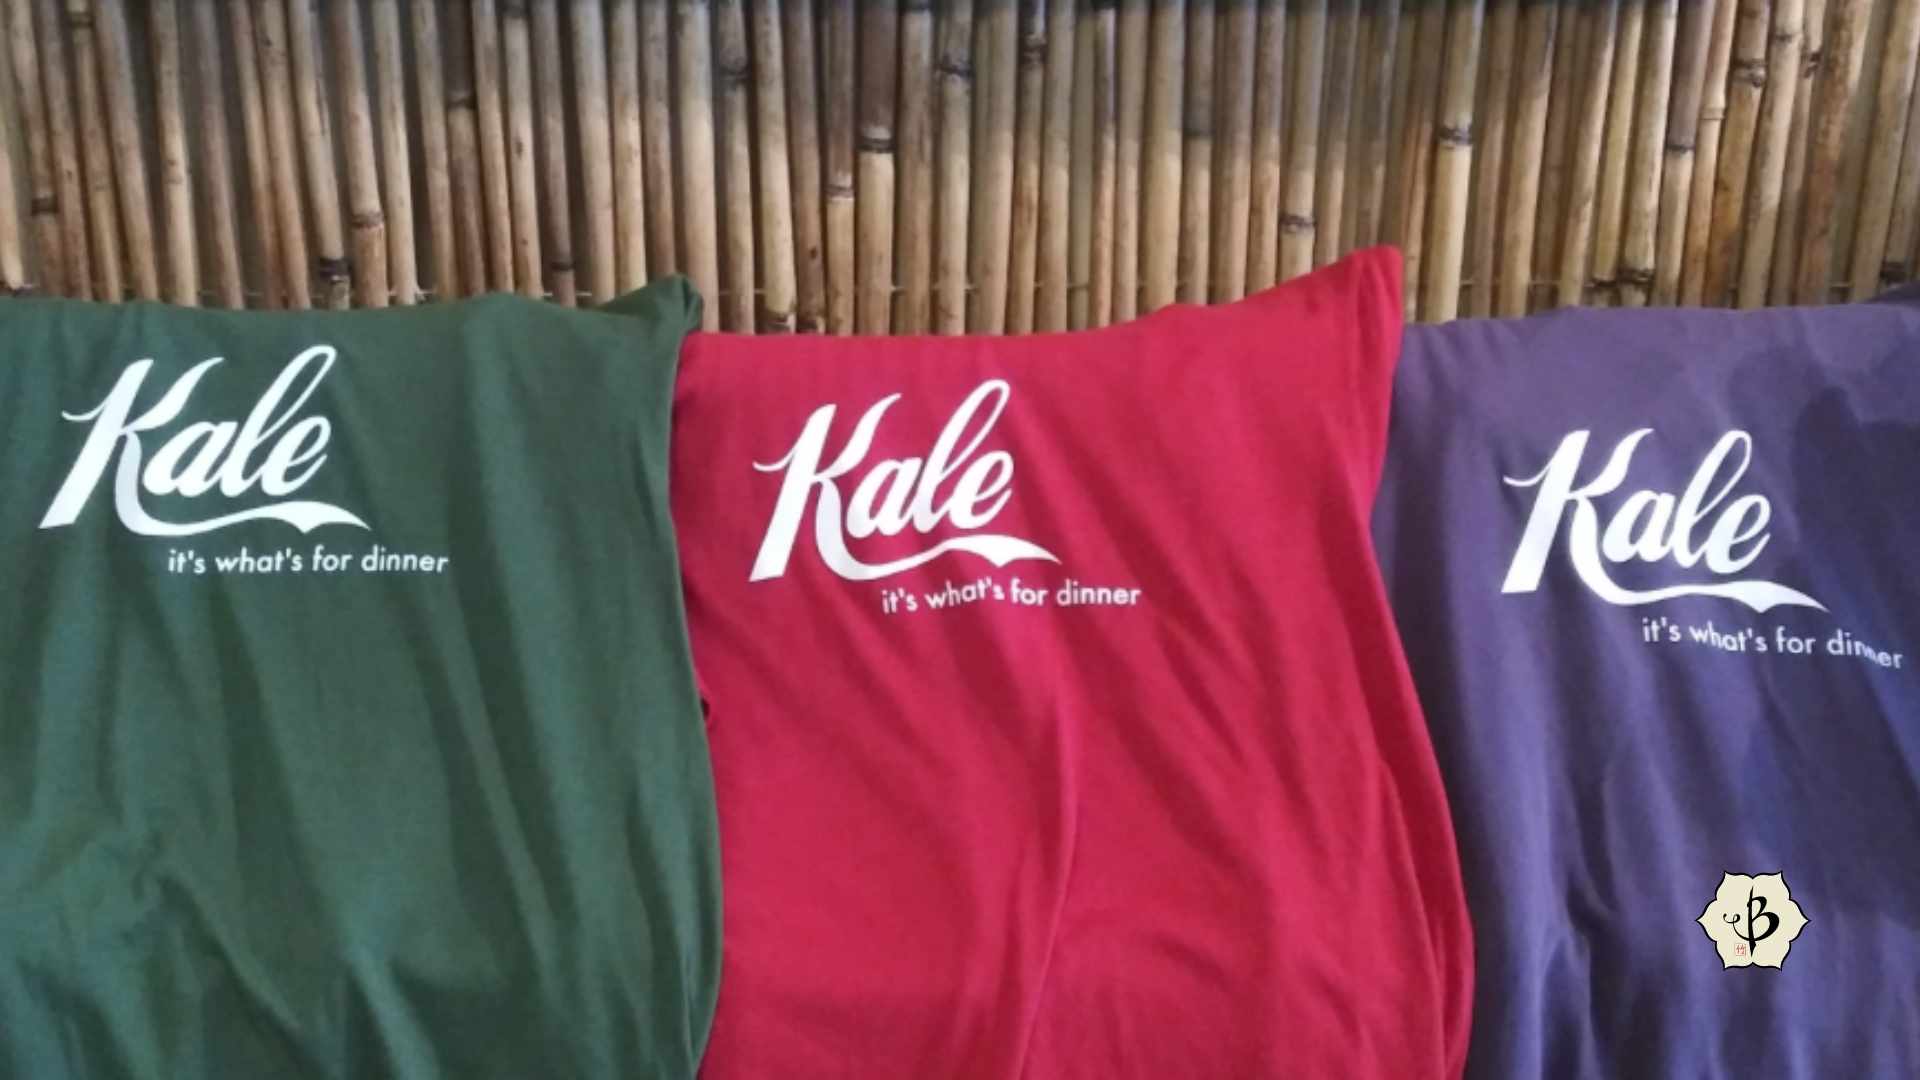 Kale tshirts for social justice